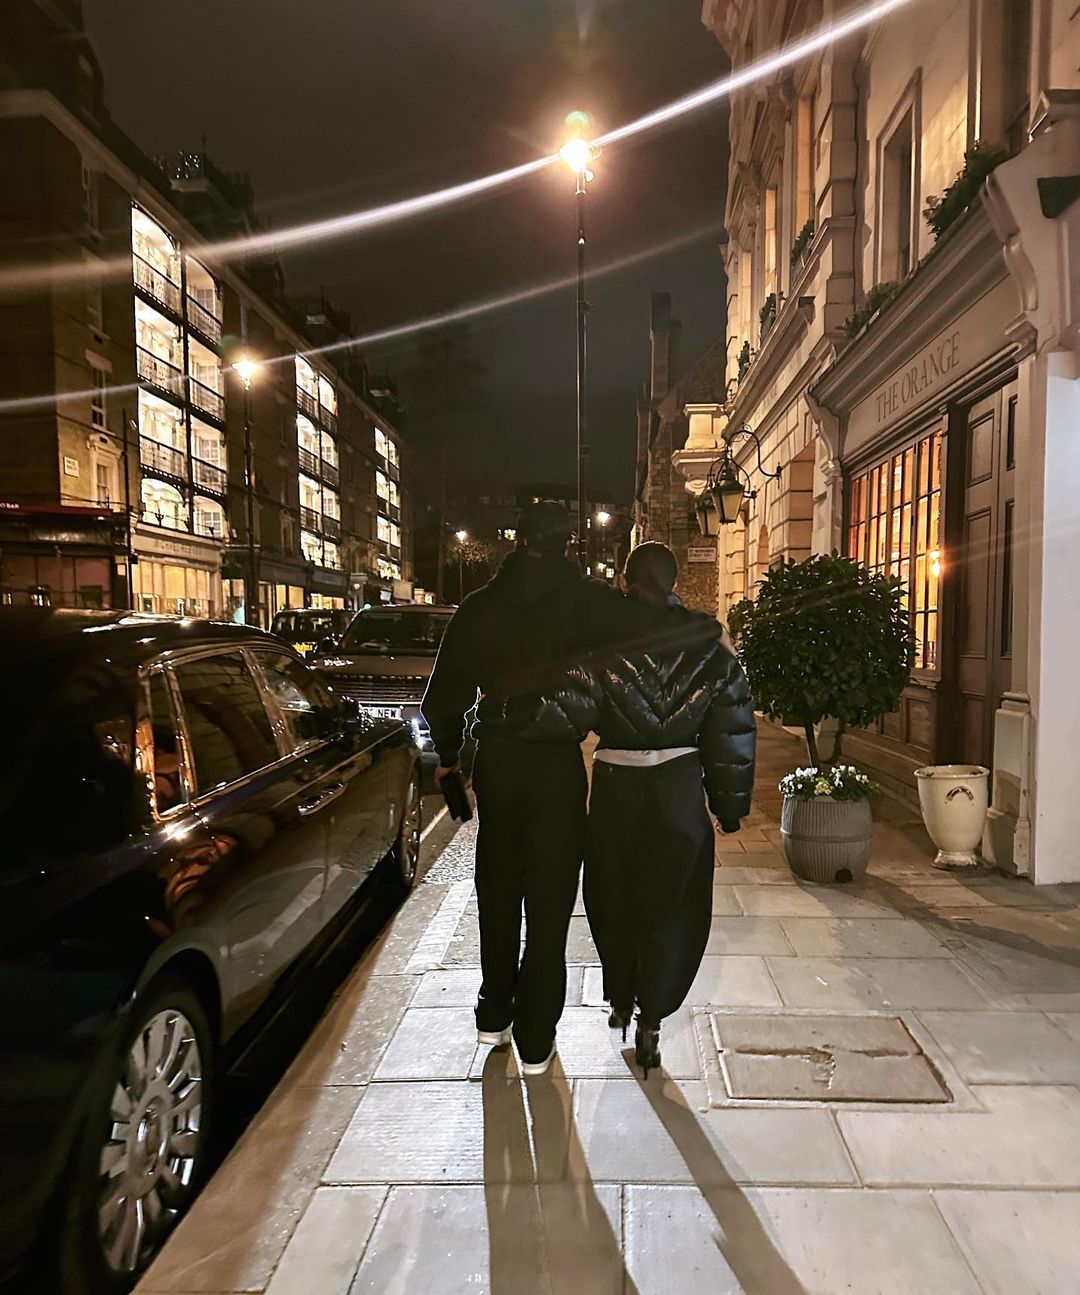 Alia Bhatt is traveling with her partner on the streets of London at night 9282